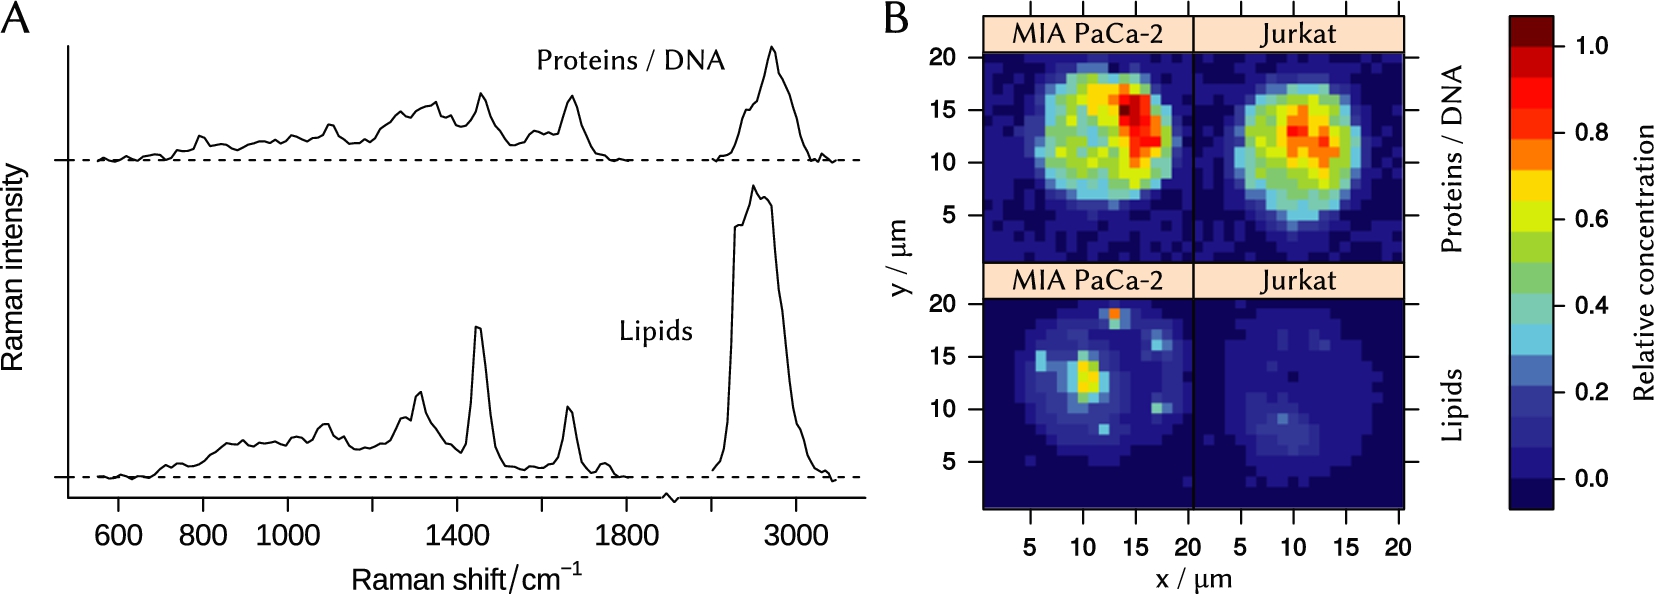 (A) – N-FINDR end-members that represent spectra of lipid and protein/DNA mixture. (B) – concentration maps of the end-members in cells of Jurkat and MIA PaCa-2 cell lines.